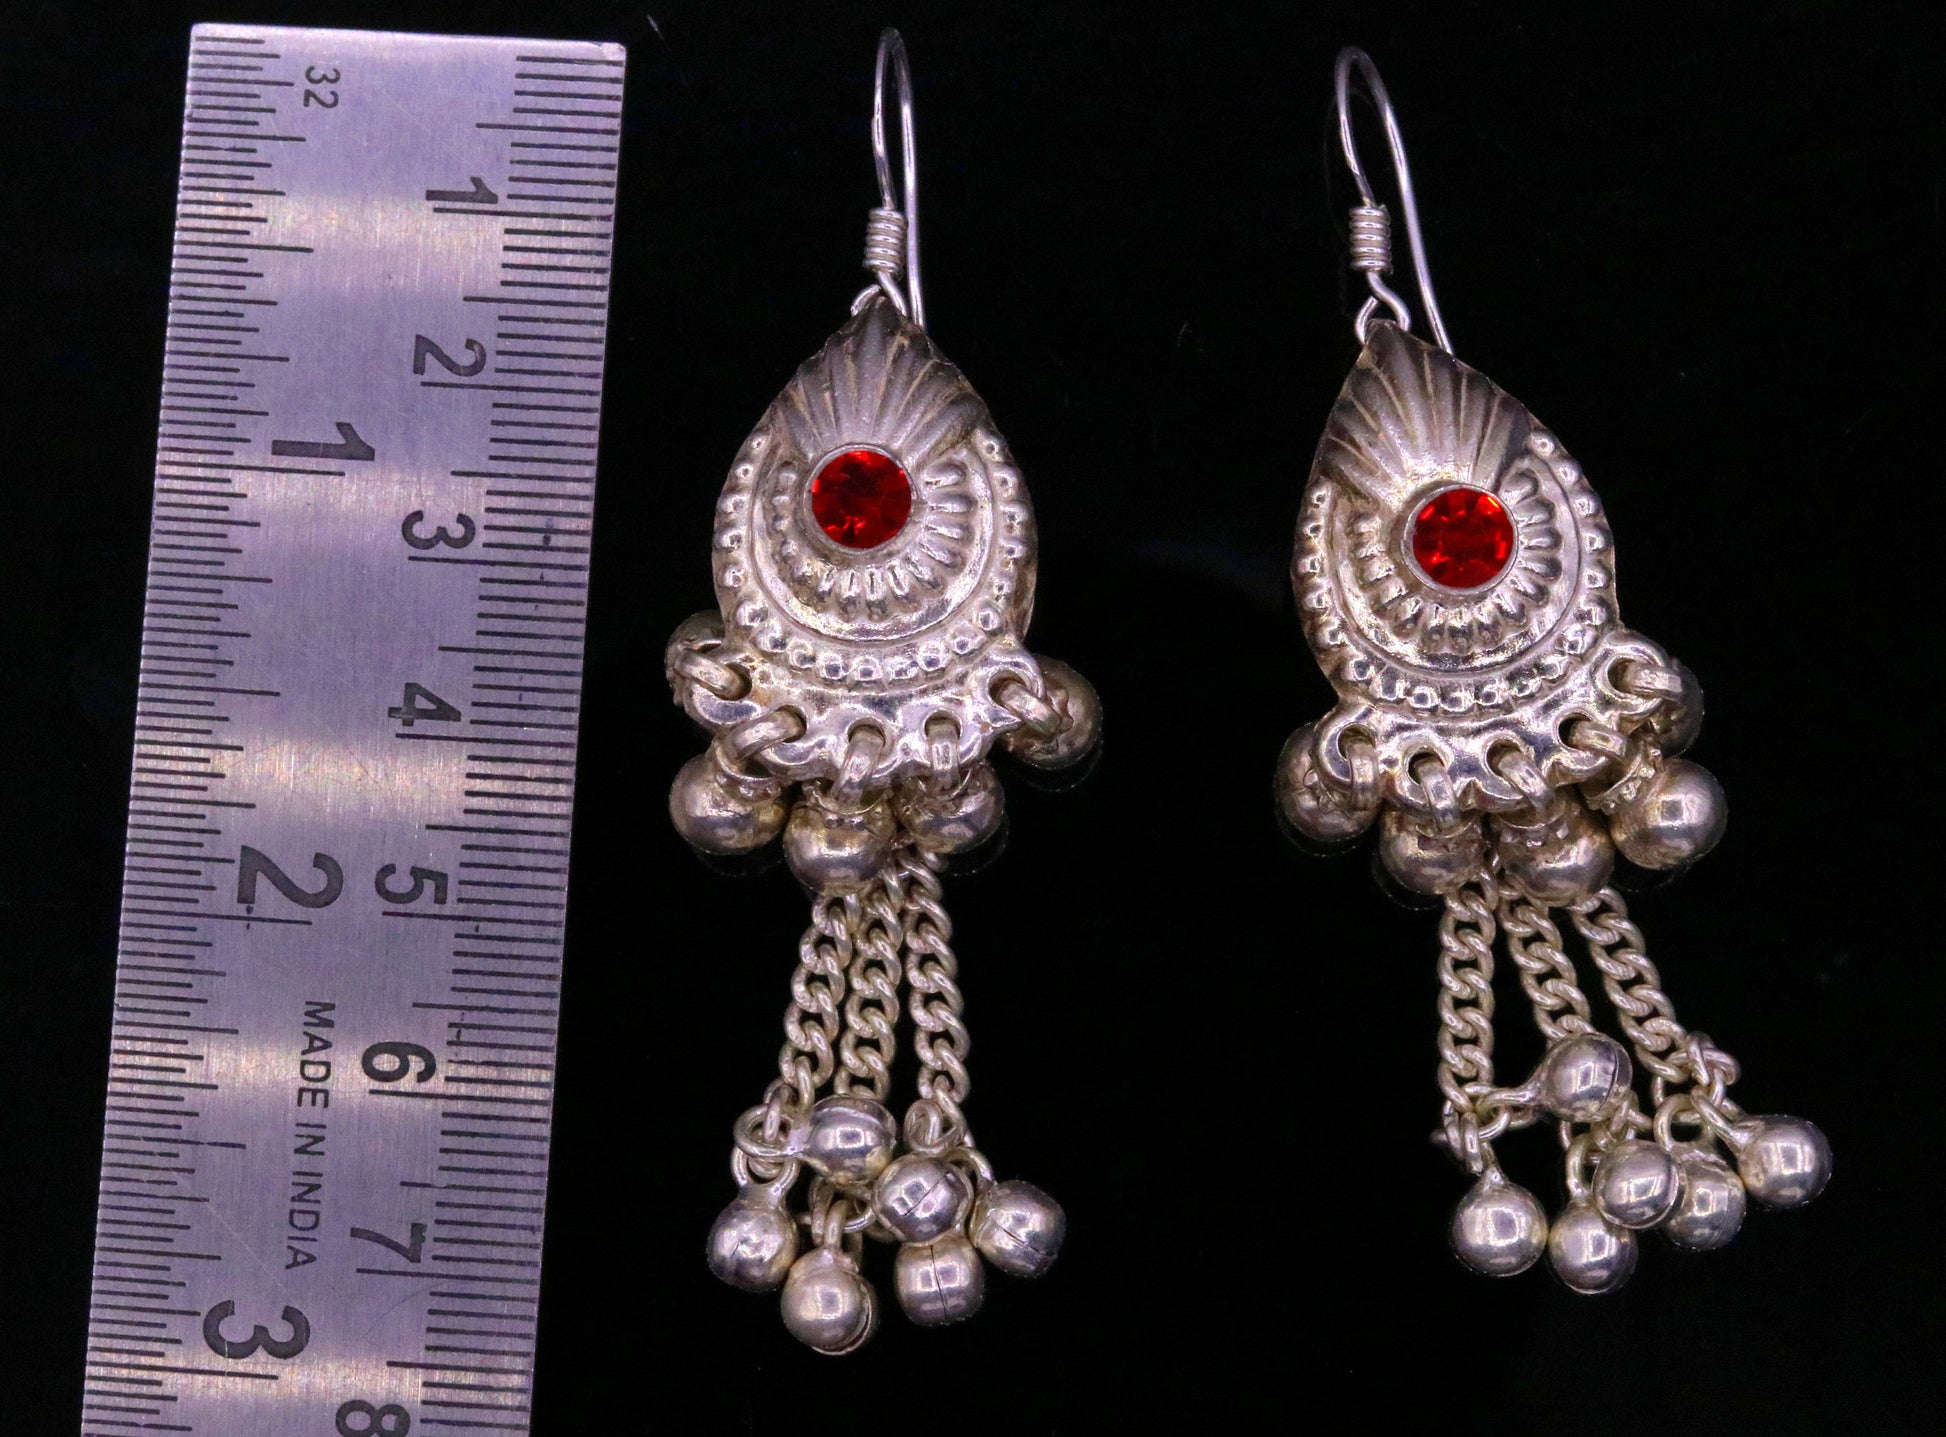 Vintage design sterling silver hoops earrings, fabulous stone and hanging noisy bells drop dangle earrings tribal jewelry from india s642 - TRIBAL ORNAMENTS